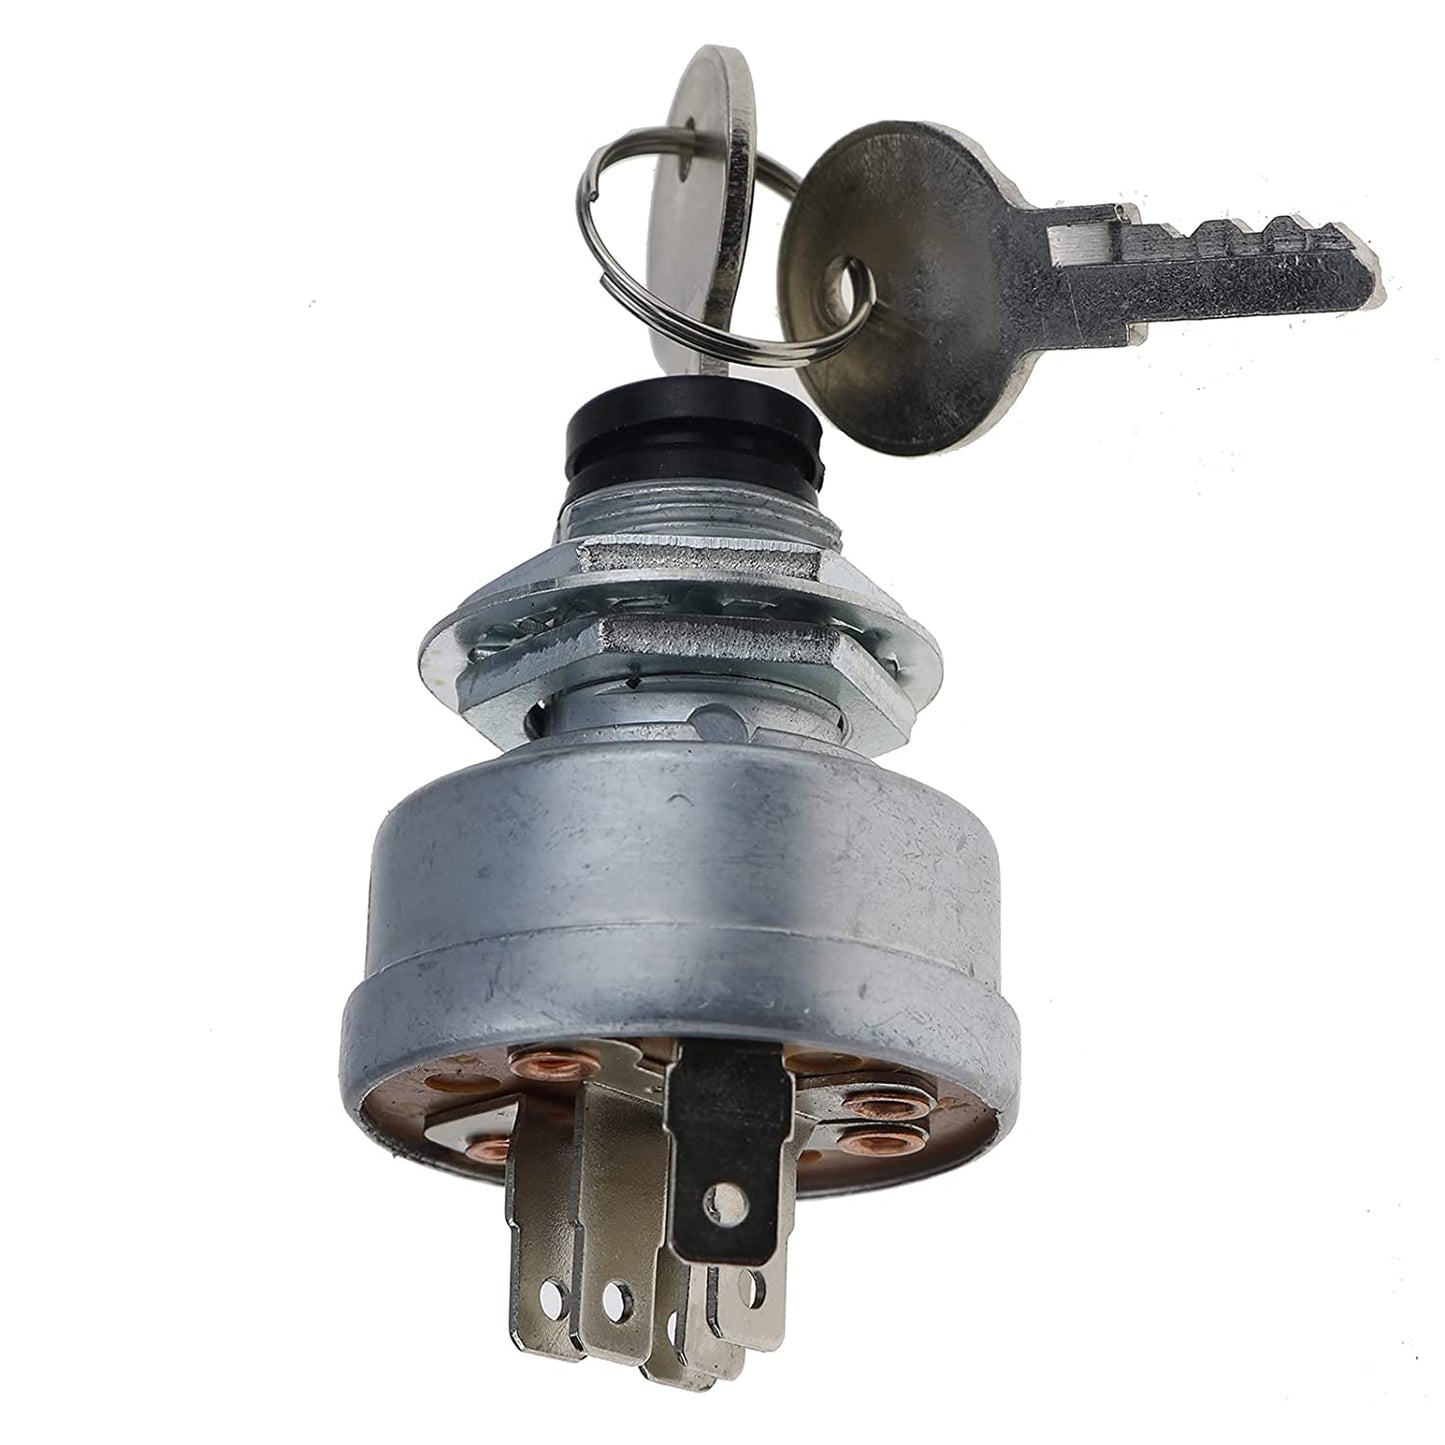 TCA22740, AM101561, TCA15075 Starter Ignition Switch Compatible With John Deere 170 240 245 260 265 285 320